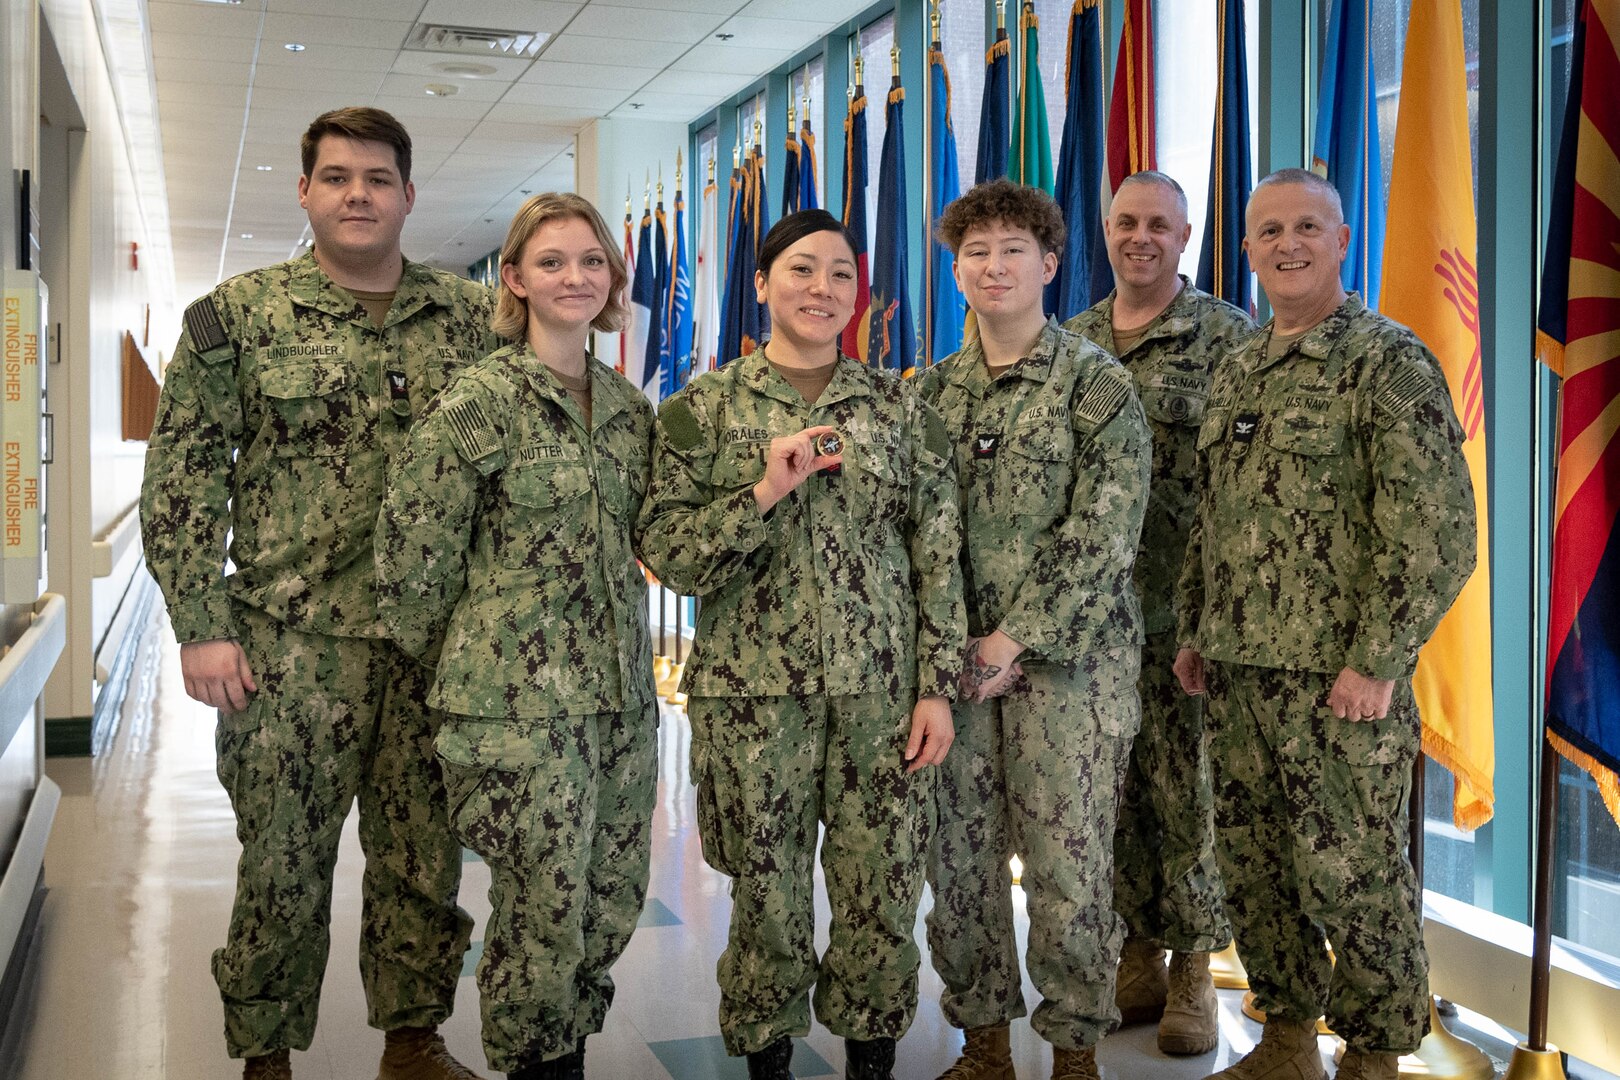 Hospital Corpsman Second Class Nancy Morales, center, received a Coin from Navy Capt. Sean Barbabella, Commander of Naval Health Clinic Cherry Point, in recognition of her initiative and expertise on Tuesday, March 5, 2024.
Faced with low staffing over the 2023 holiday period, Morales, assigned to the clinic’s Readiness Department, developed a new system expediting service members’ Periodic Health Assessments, resulting in the rapid review of over 200 in a period of two weeks.